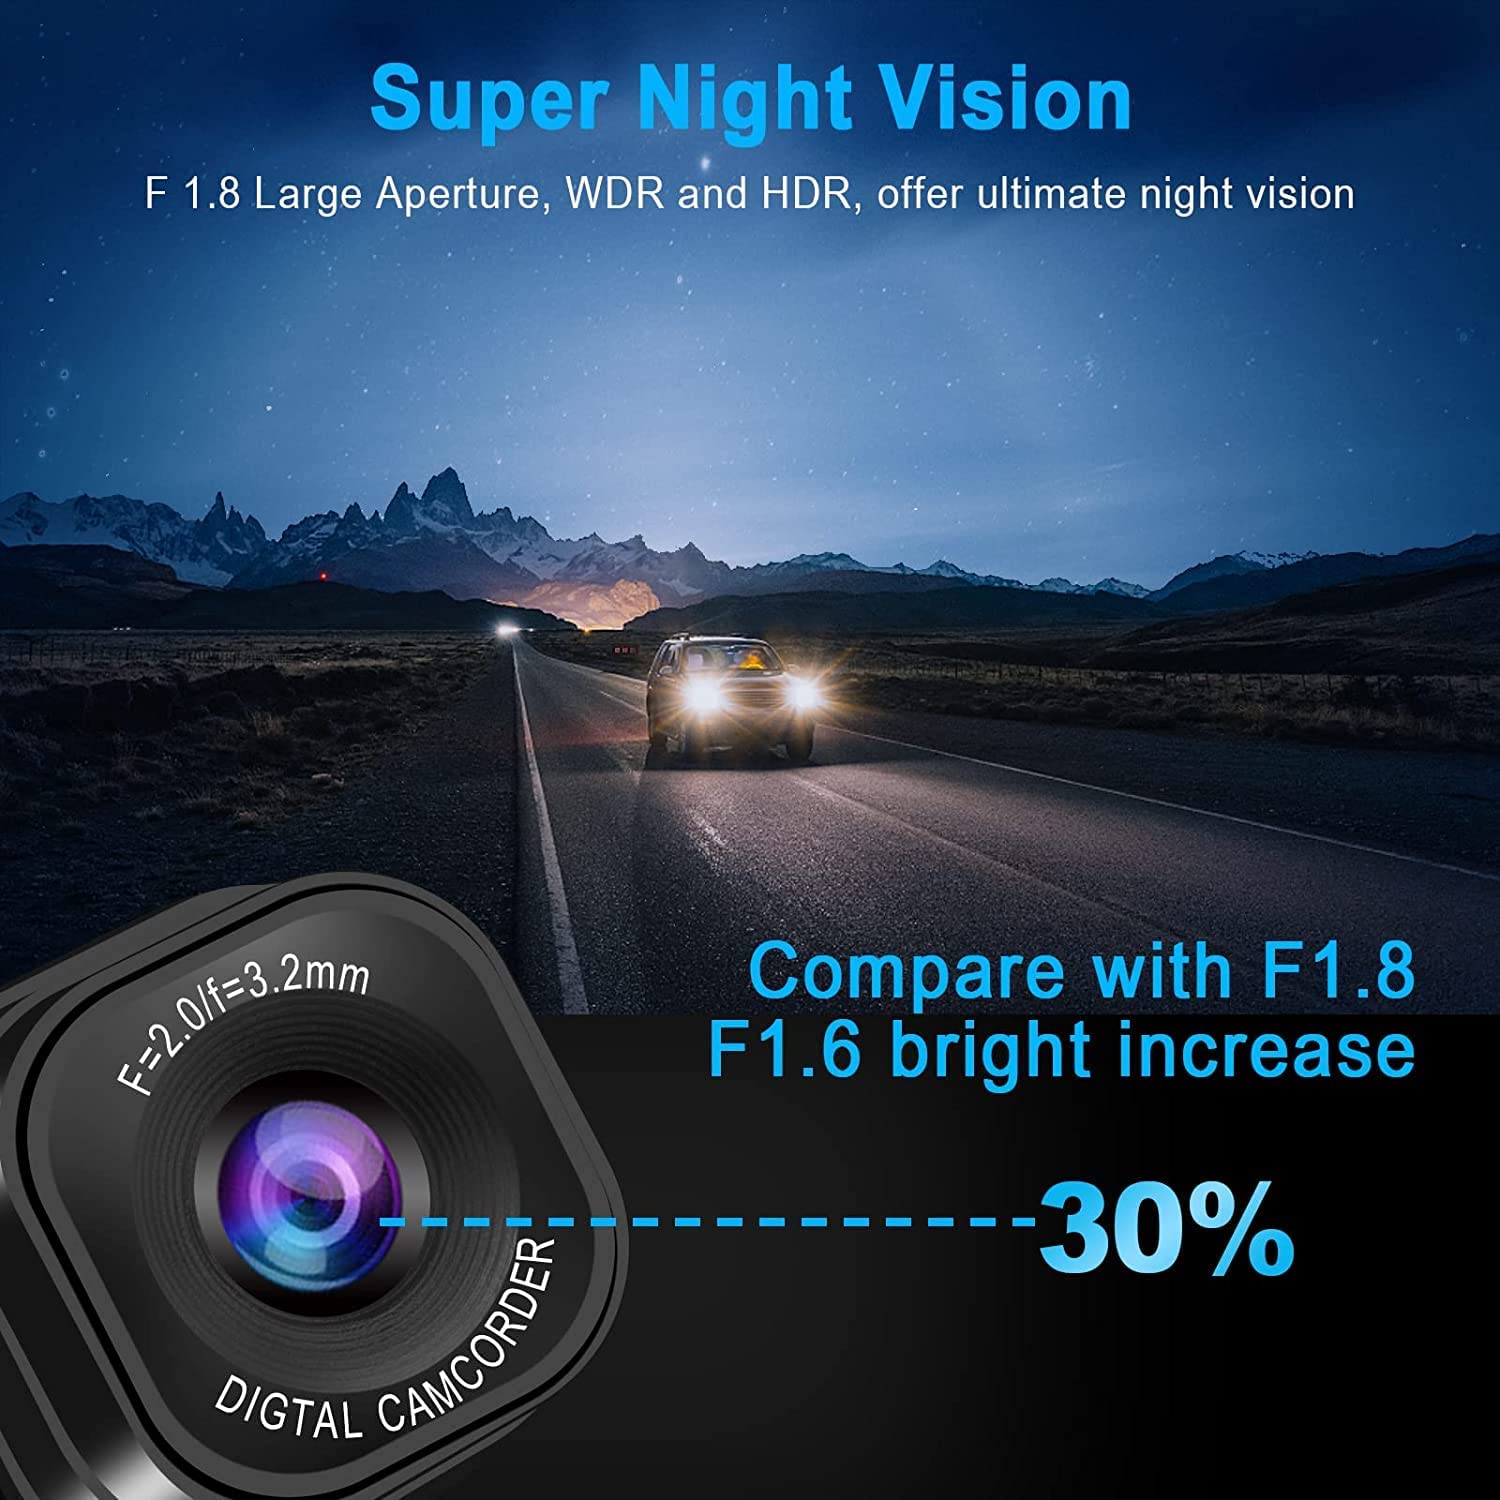 Supad Dash Cam,Dash Camera for Car,3 Inch LCD Screen,720P Full HD Car Dashboard Recorder,120° Wide Angle Dashcam,Night Vision,WDR, Motion Detection, Parking Mode